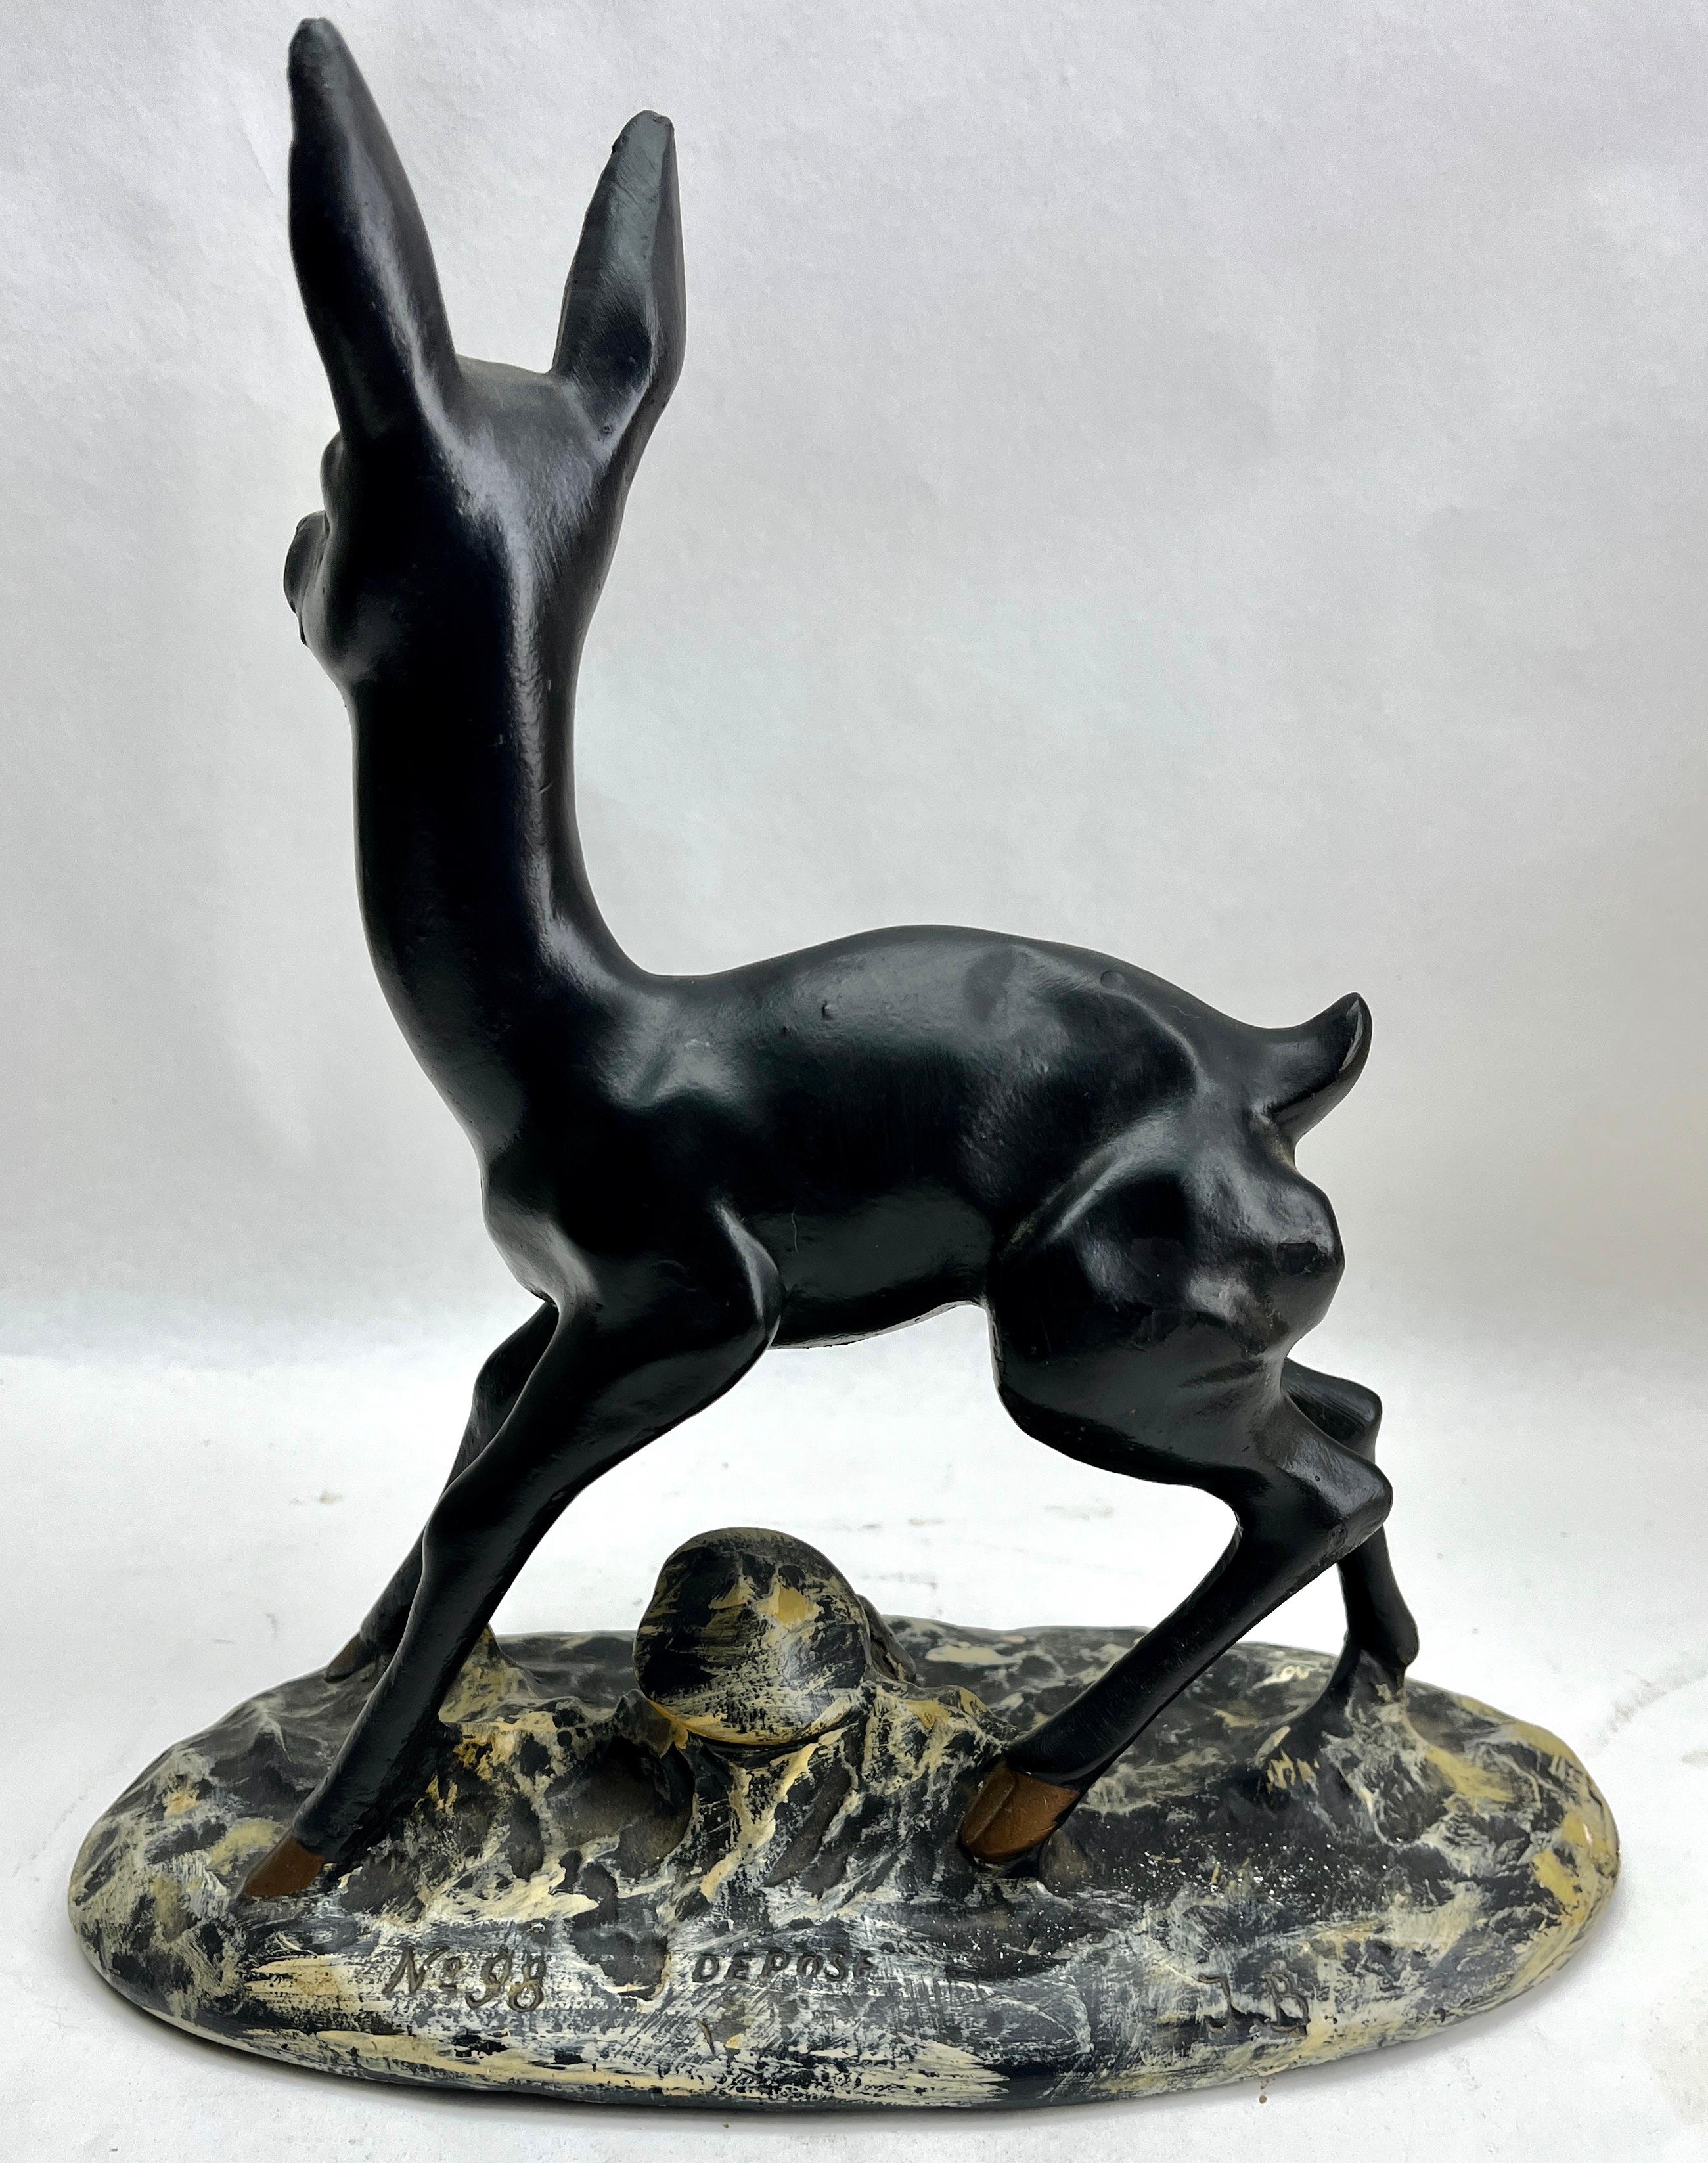 Signed: Depose No 98 J.B

This stylish Bambi sculpture dates to the late 1930s and was Fabricated in France.
The piece is in excellent condition and a real beauty!

Available other Art Nouveau, Art deco and Vintage pieces:

With Best Wishes